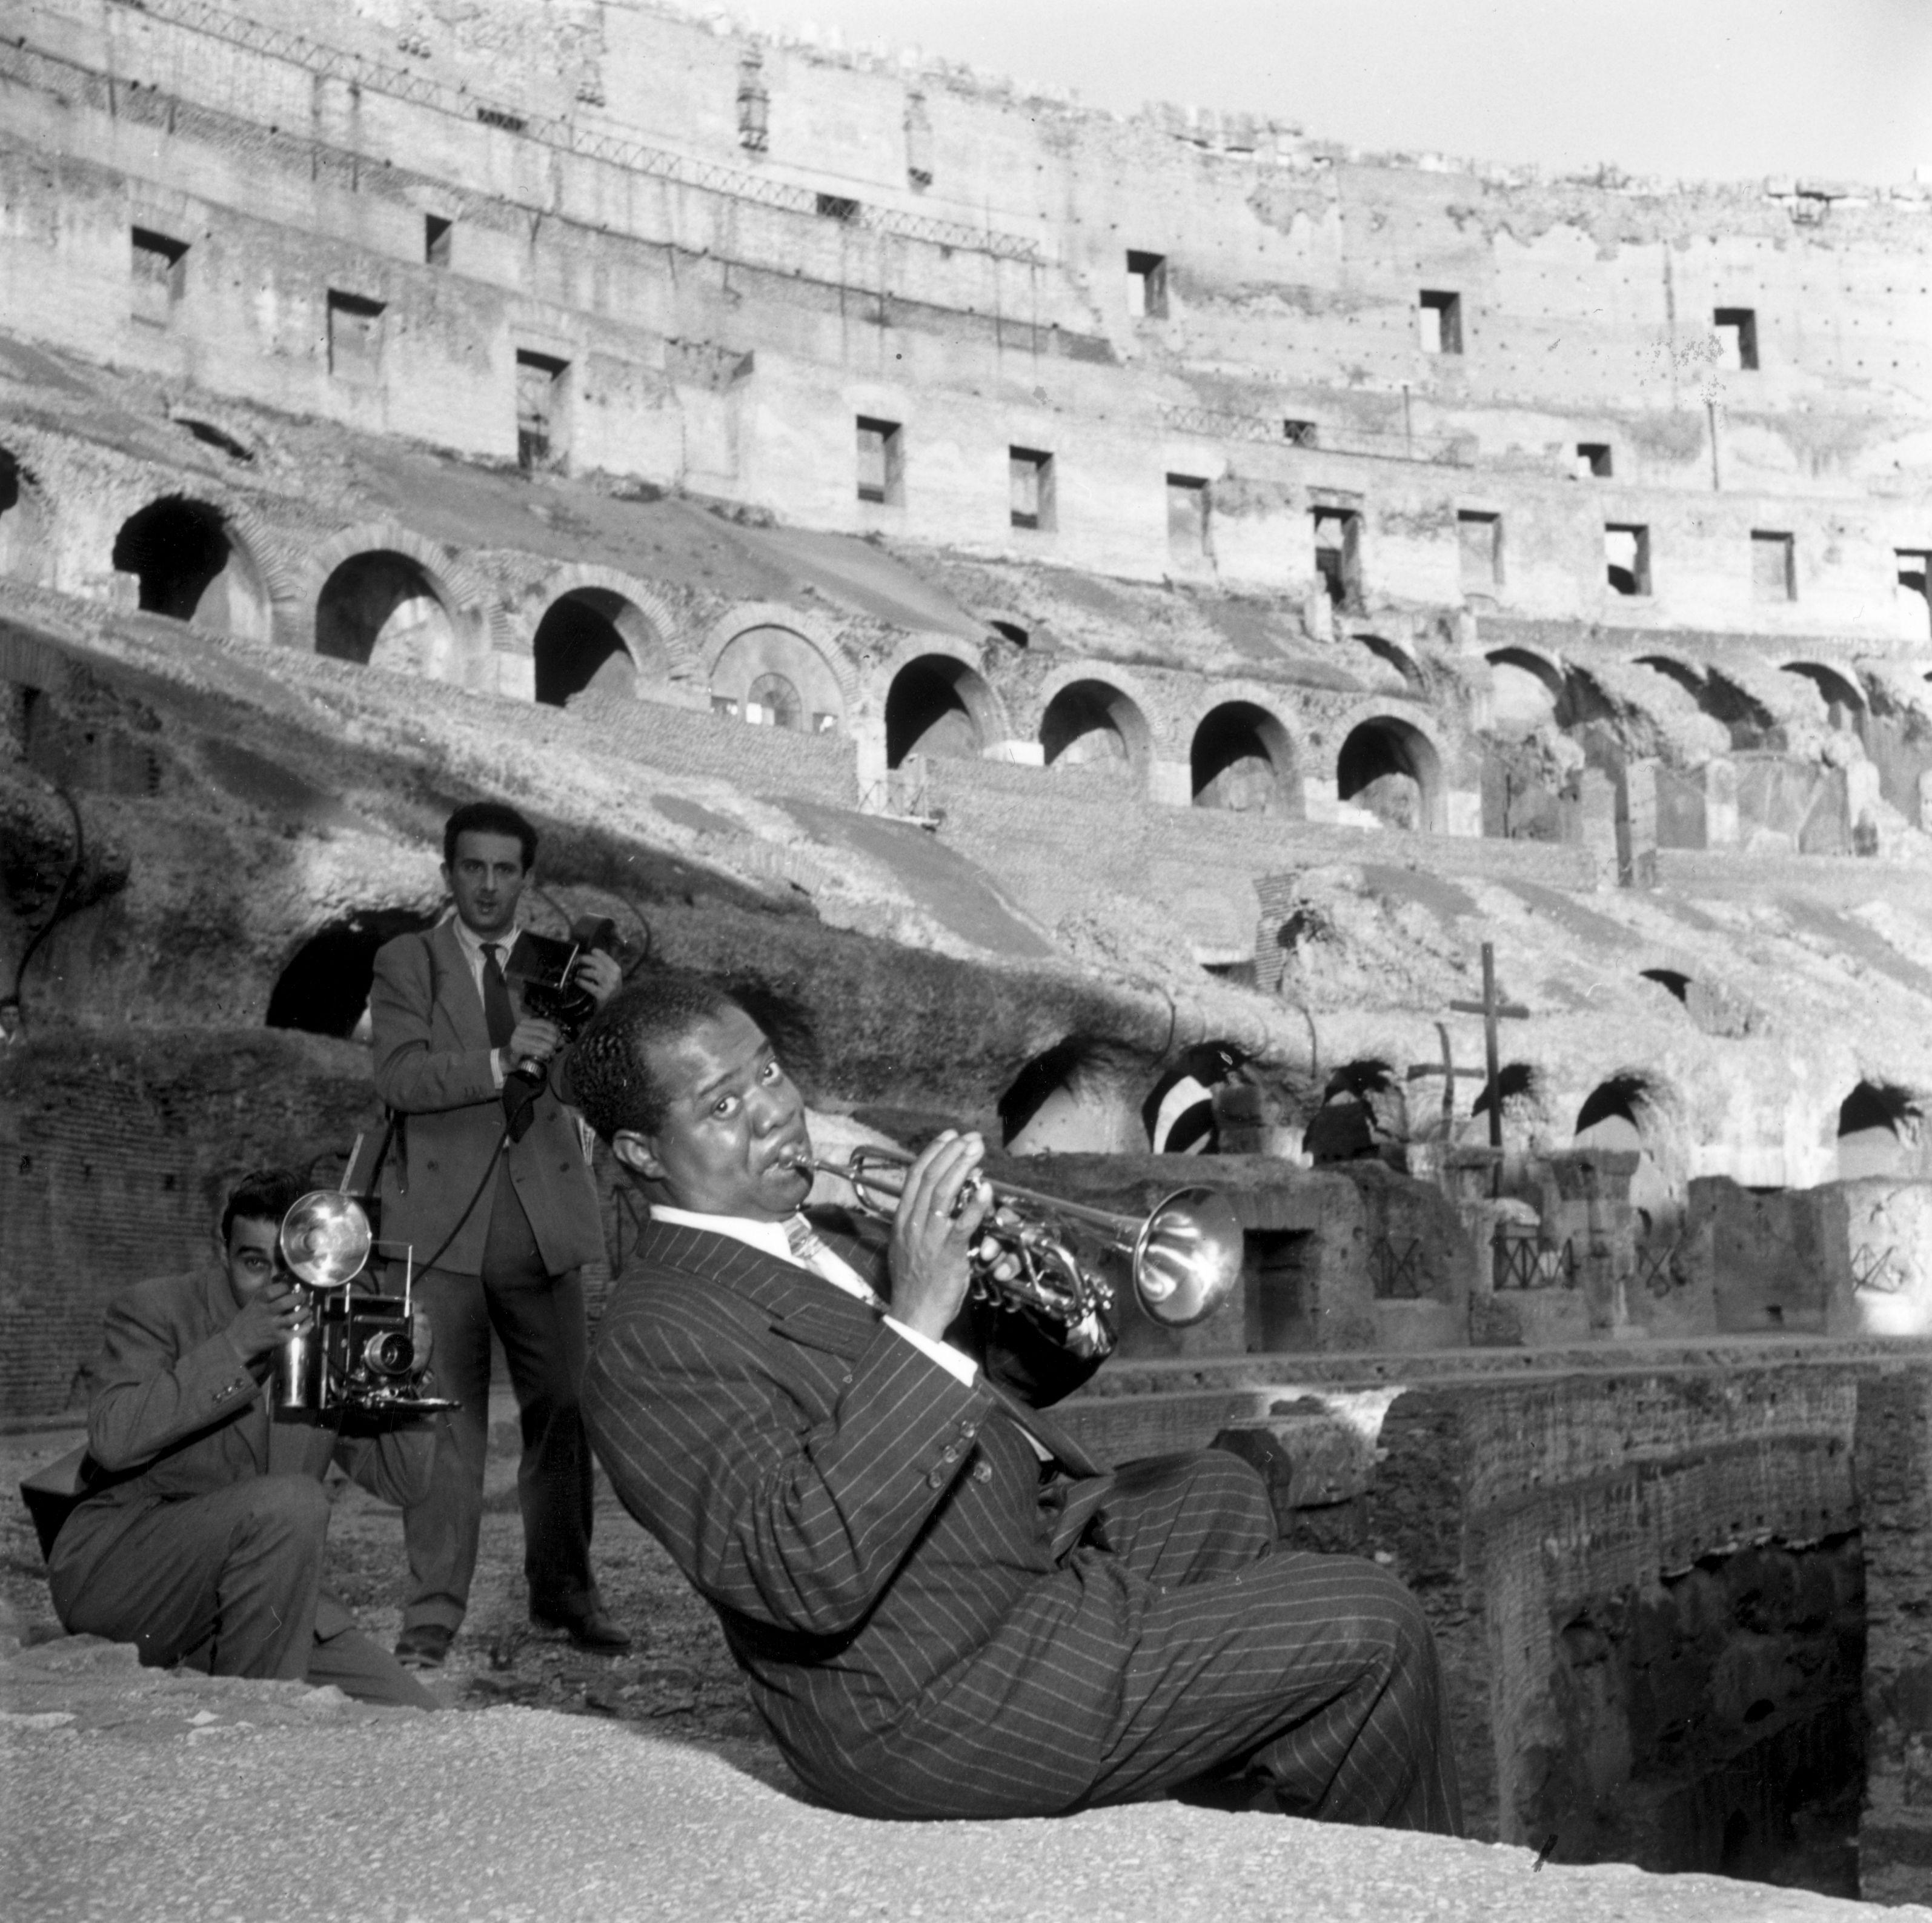 Slim Aarons Portrait Photograph - The King of Jazz, Louis Armstrong in 1940s Rome, Estate Edition